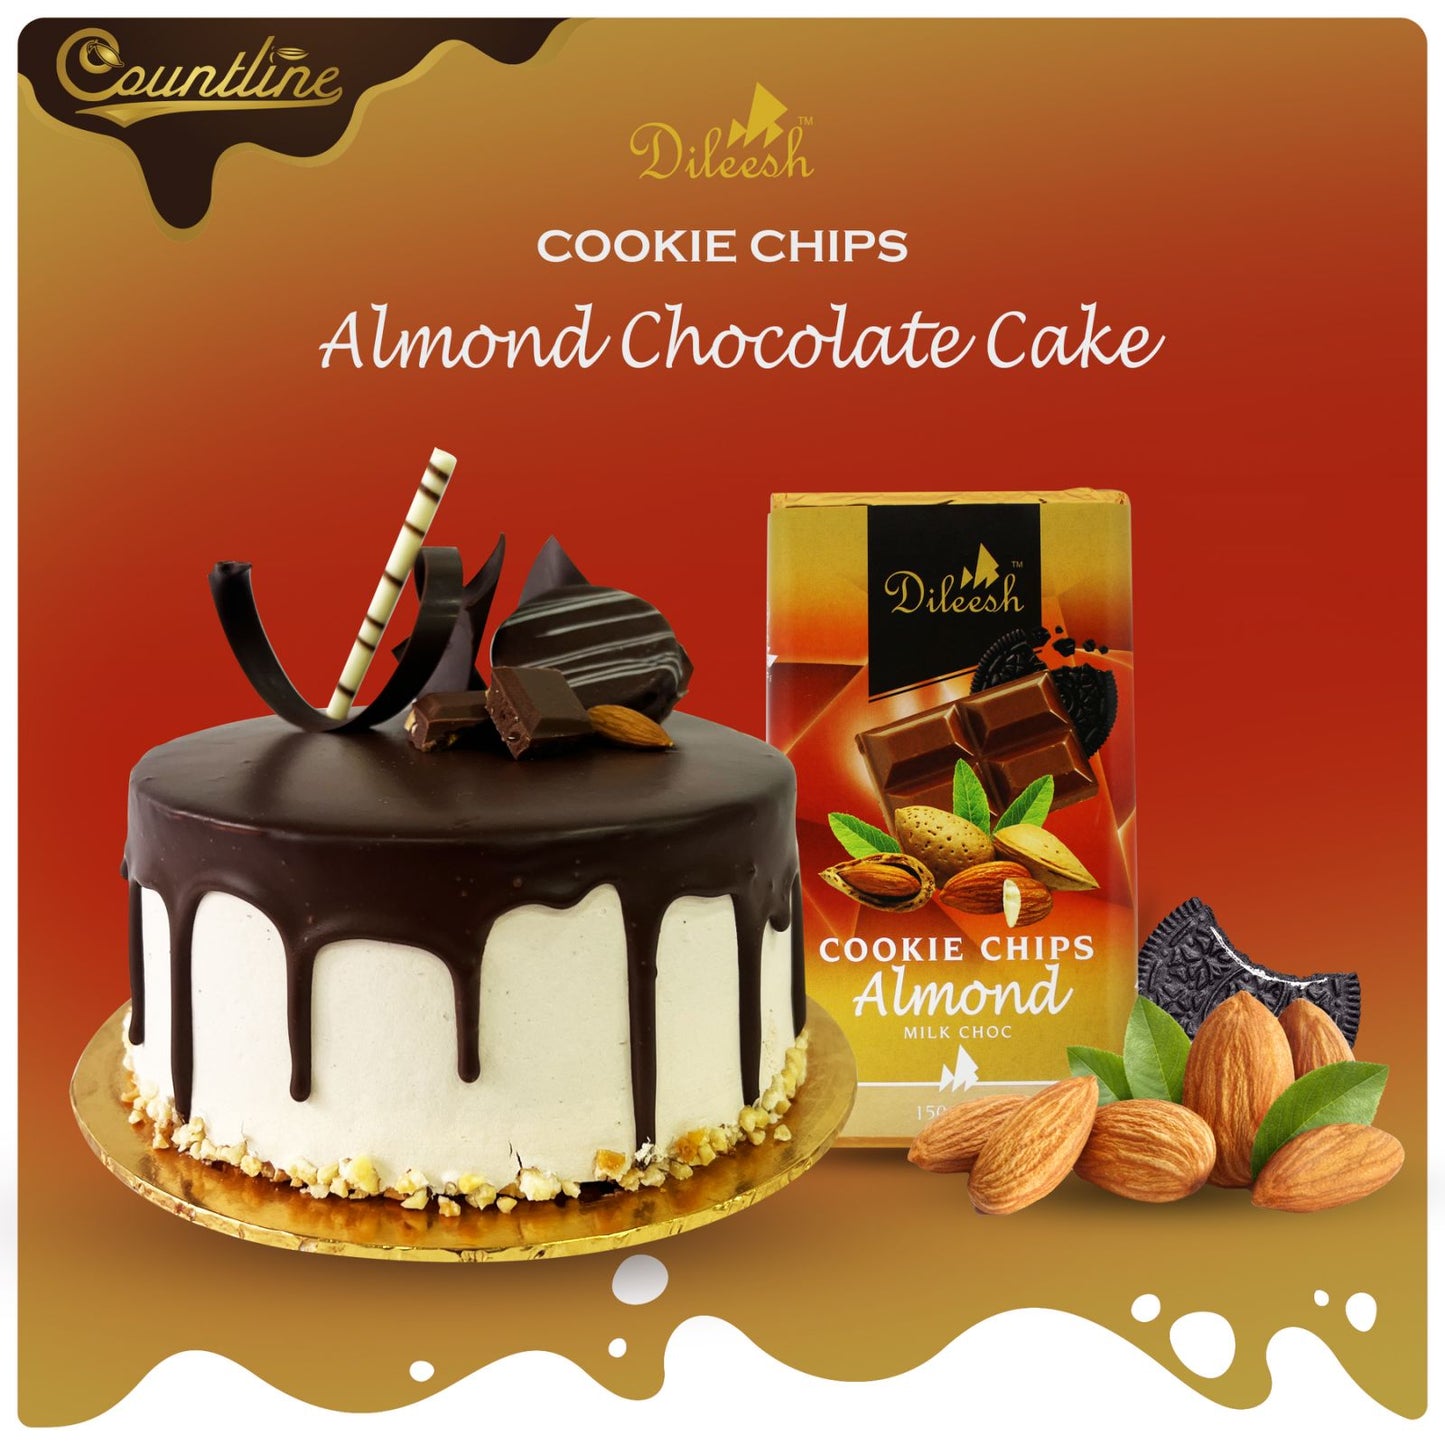 Dileesh Almond Cookie Chips Cake